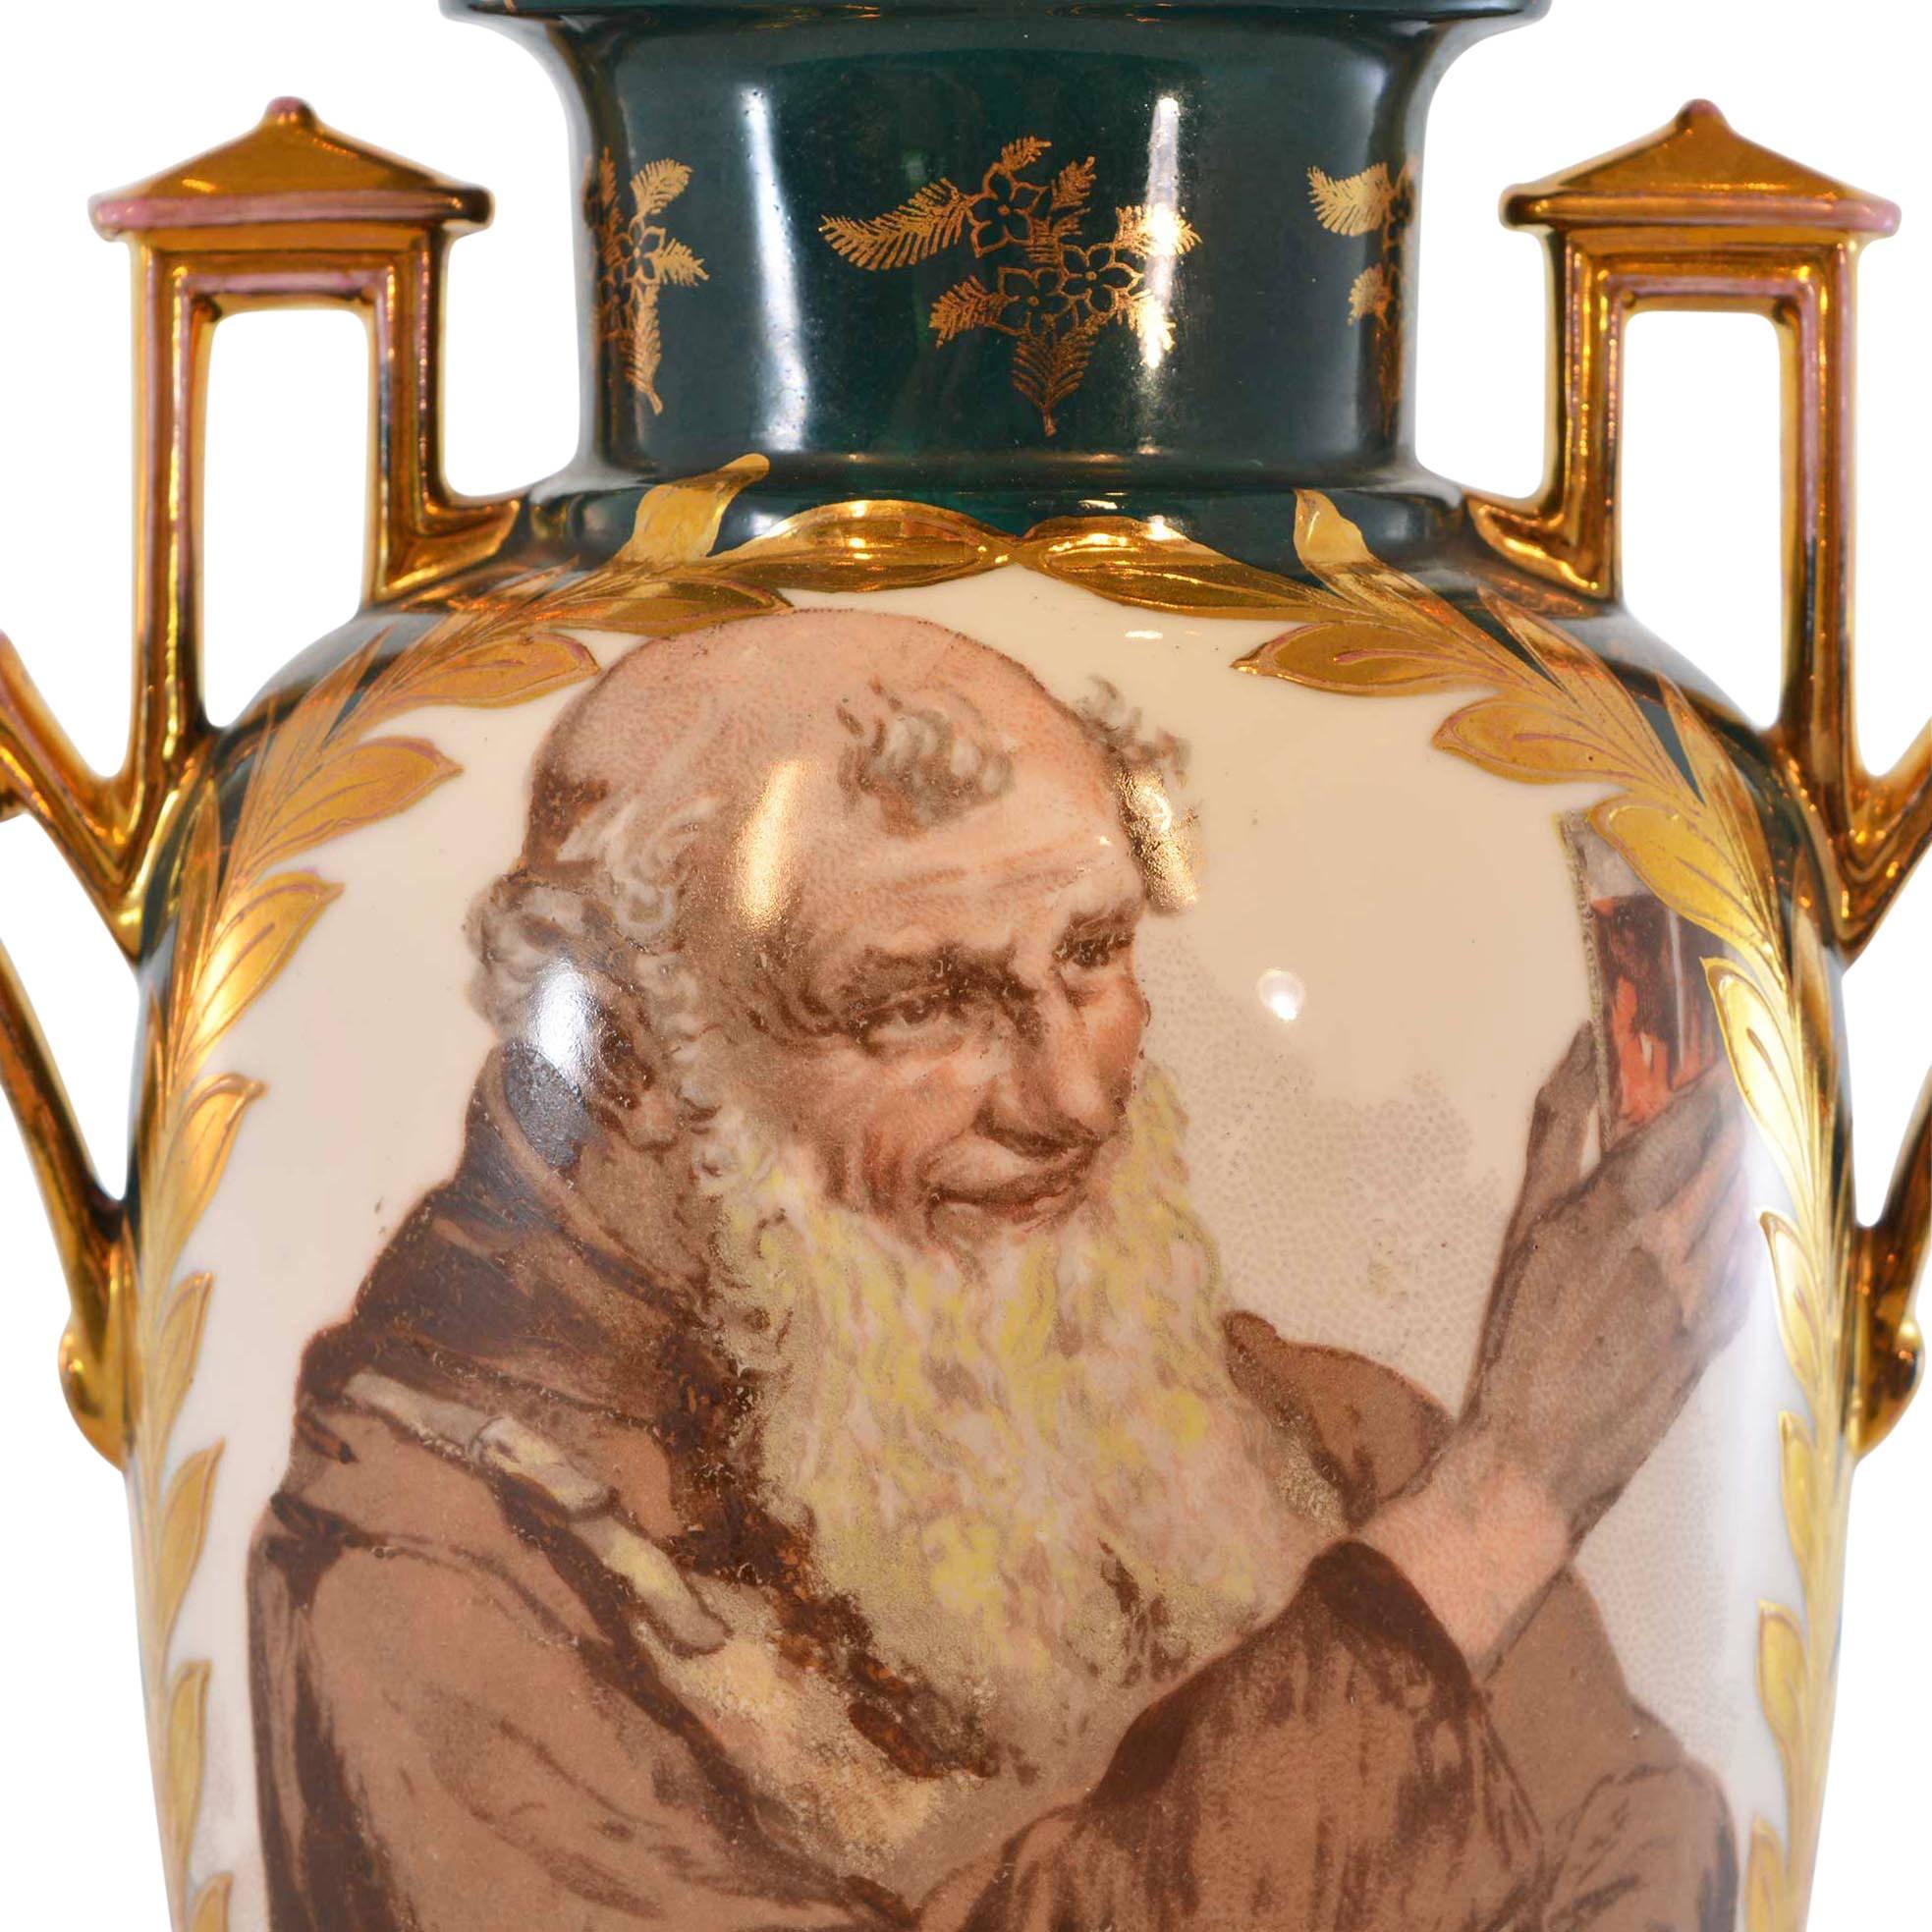 This hand-painted vase from Austria has a rich green base color with a front center design of a bearded craftsman admiring his perfected beer. The hand-painted gold floral detail wrap around the sides and back. There is an intrigue center design on